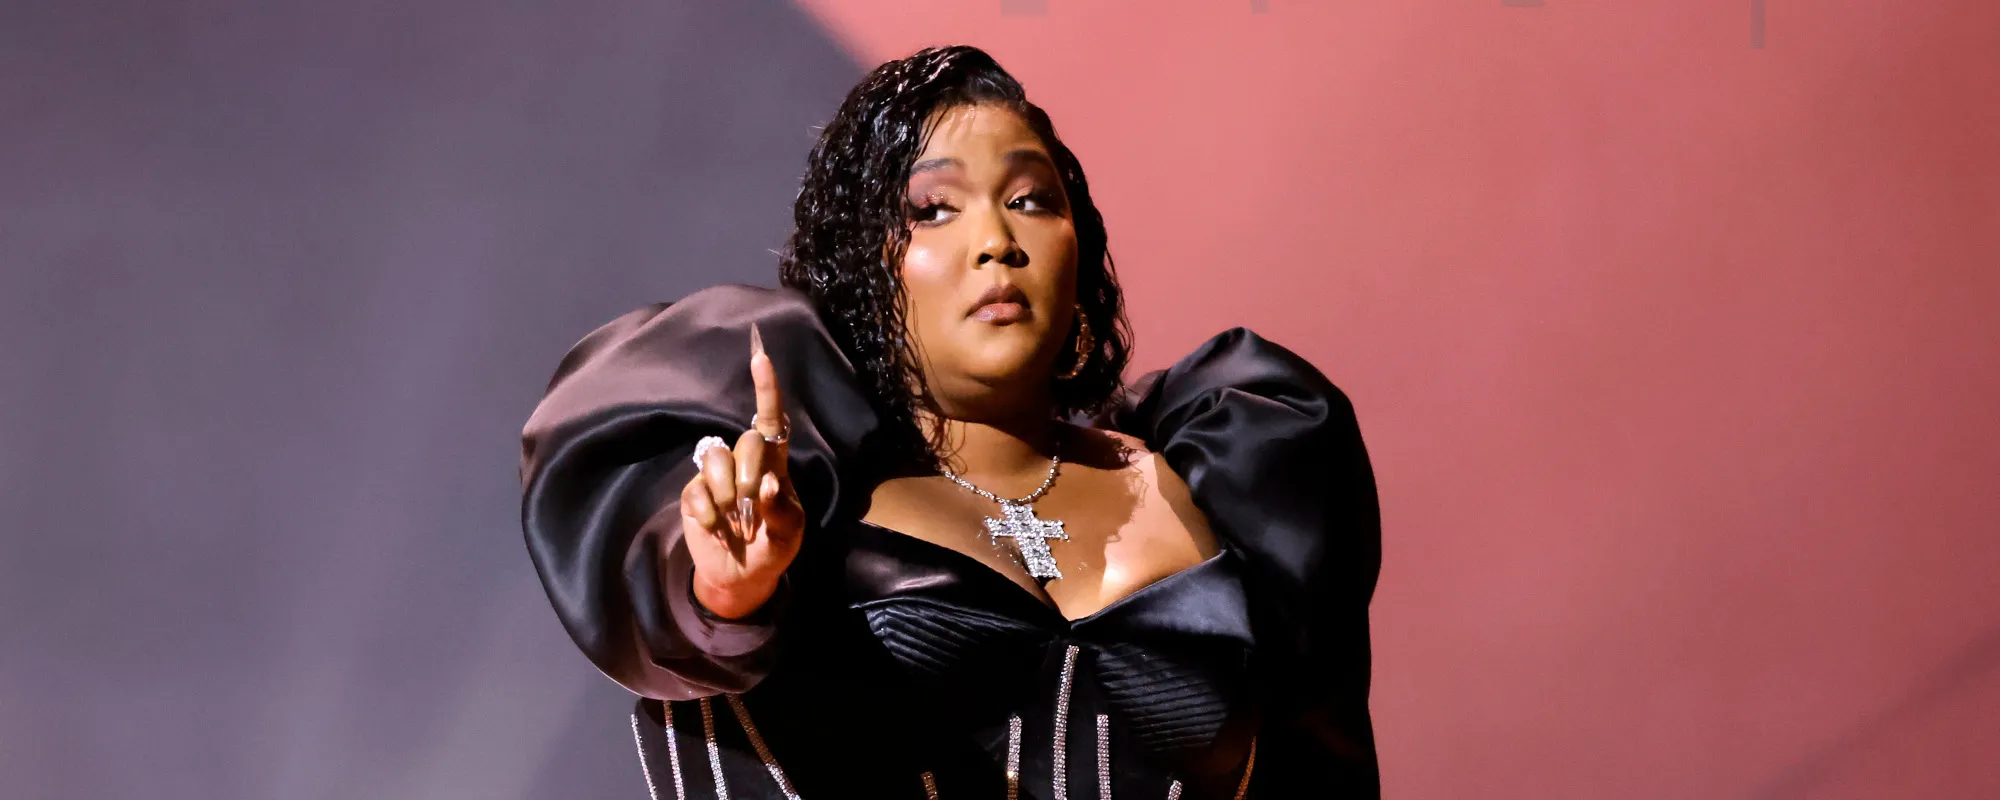 Watch: Lizzo Covers “Unholy” by Sam Smith and Kim Petras—With a Flute Solo